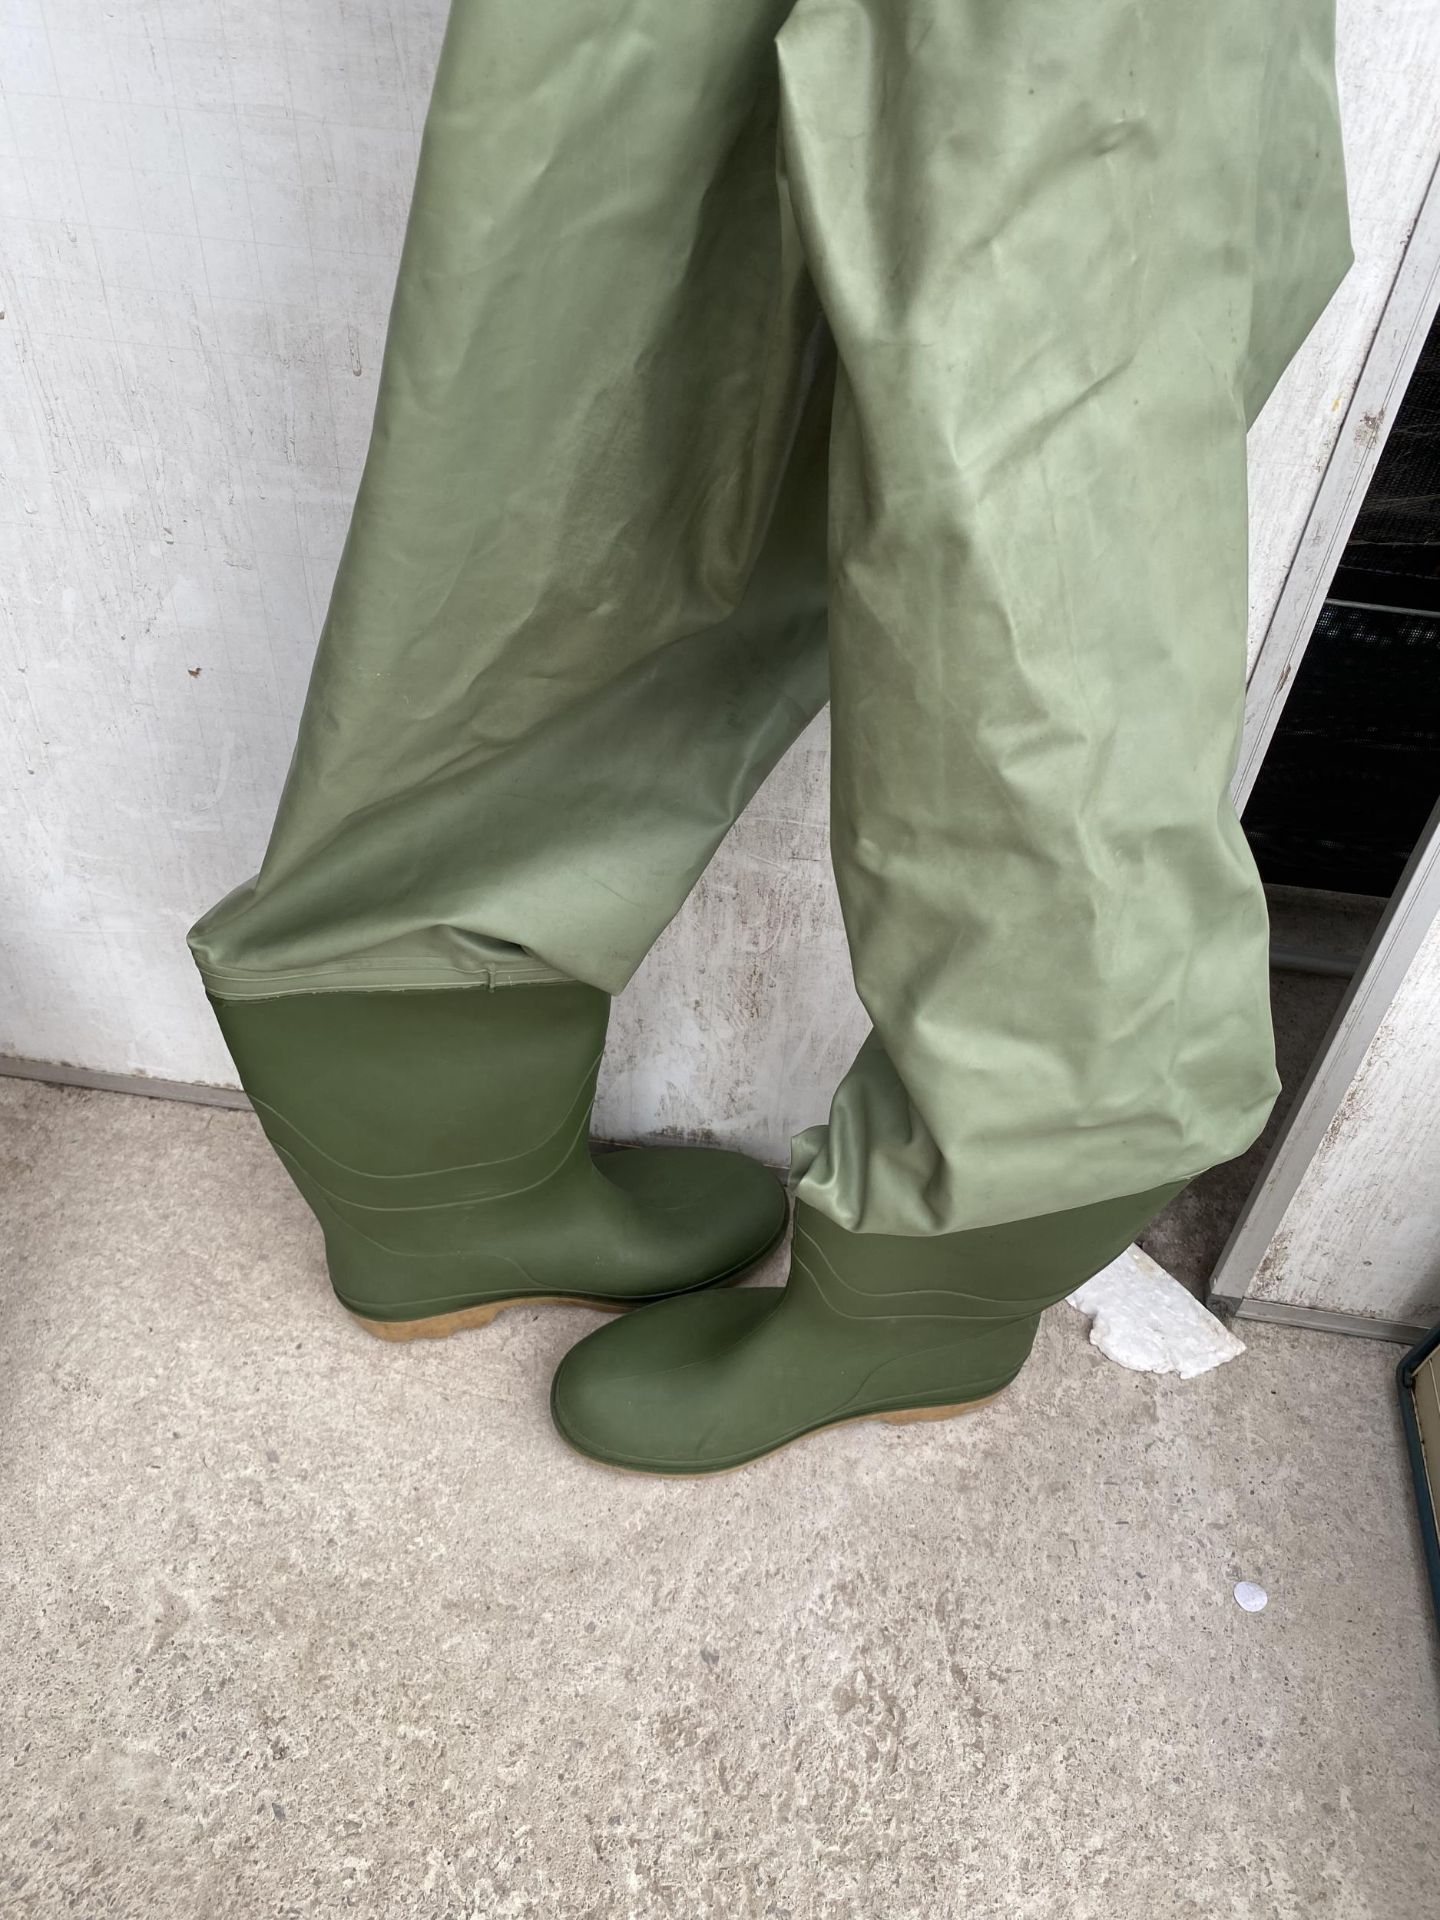 A PAIR OF SIZE 11 OCEAN FISHING CHEST WADERS - Image 2 of 4